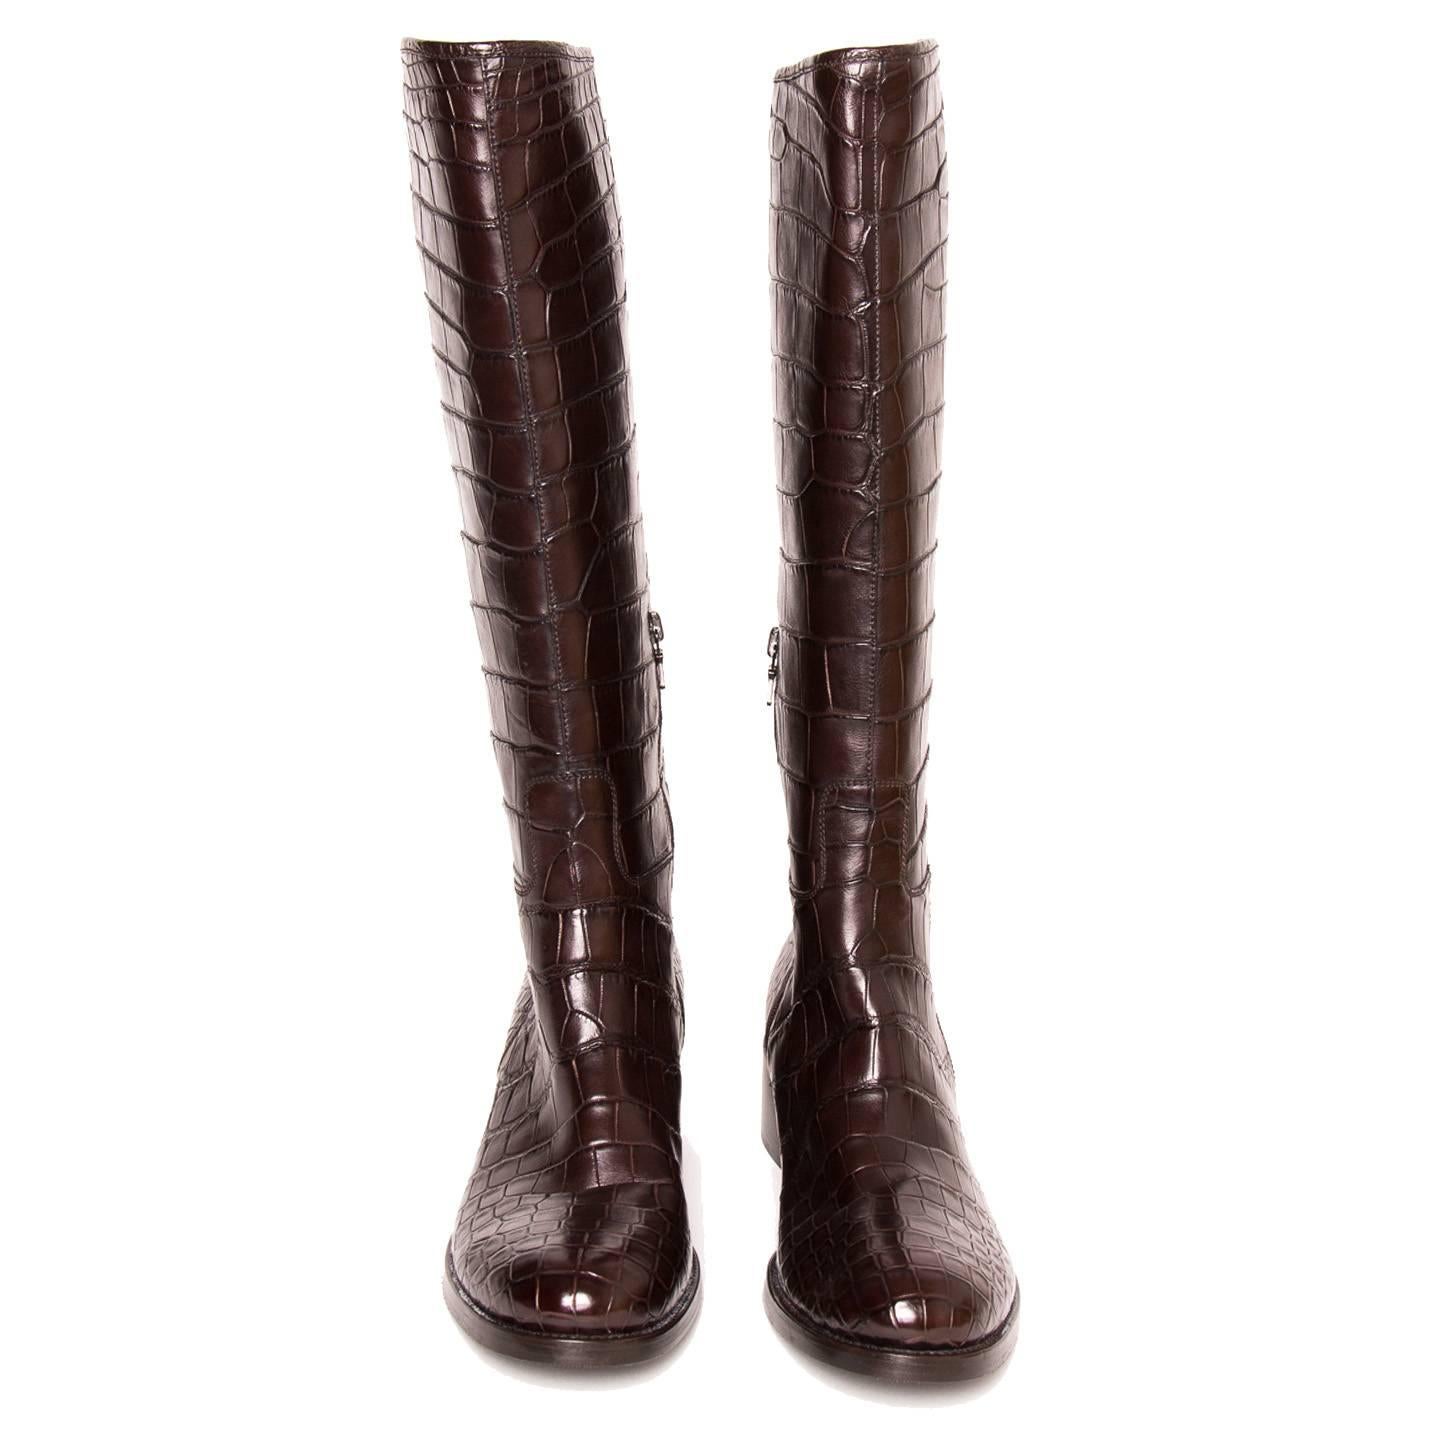 Dark brown crocodile knee high boots with round toe, narrow fit and instep zipper. Made in Italy. Heel 1.75”.

Size 40 Italian sizing

Condition Excellent: never worn